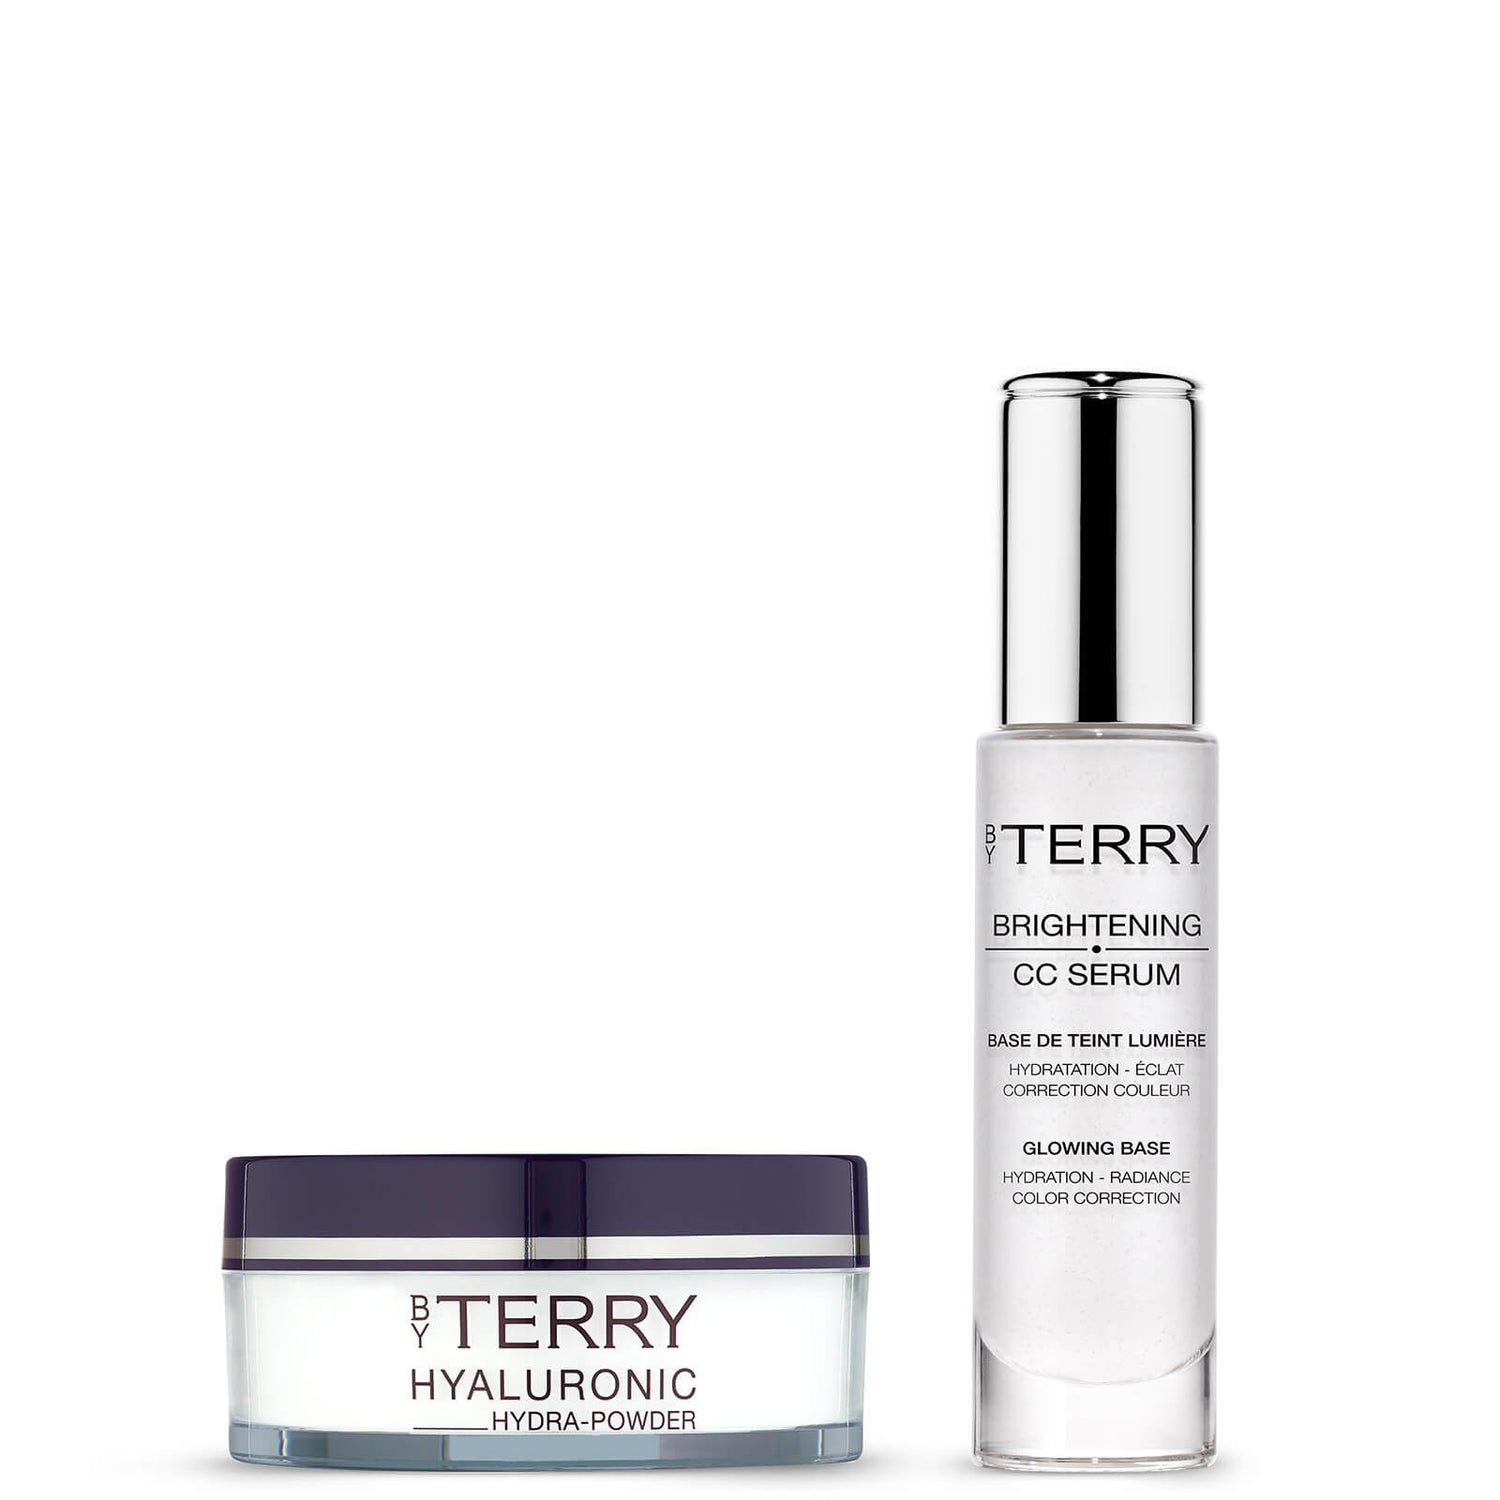 By Terry Hyaluronic Hydra-Powder and Cellularose CC Serum - No.1 Immaculate Light Bundle